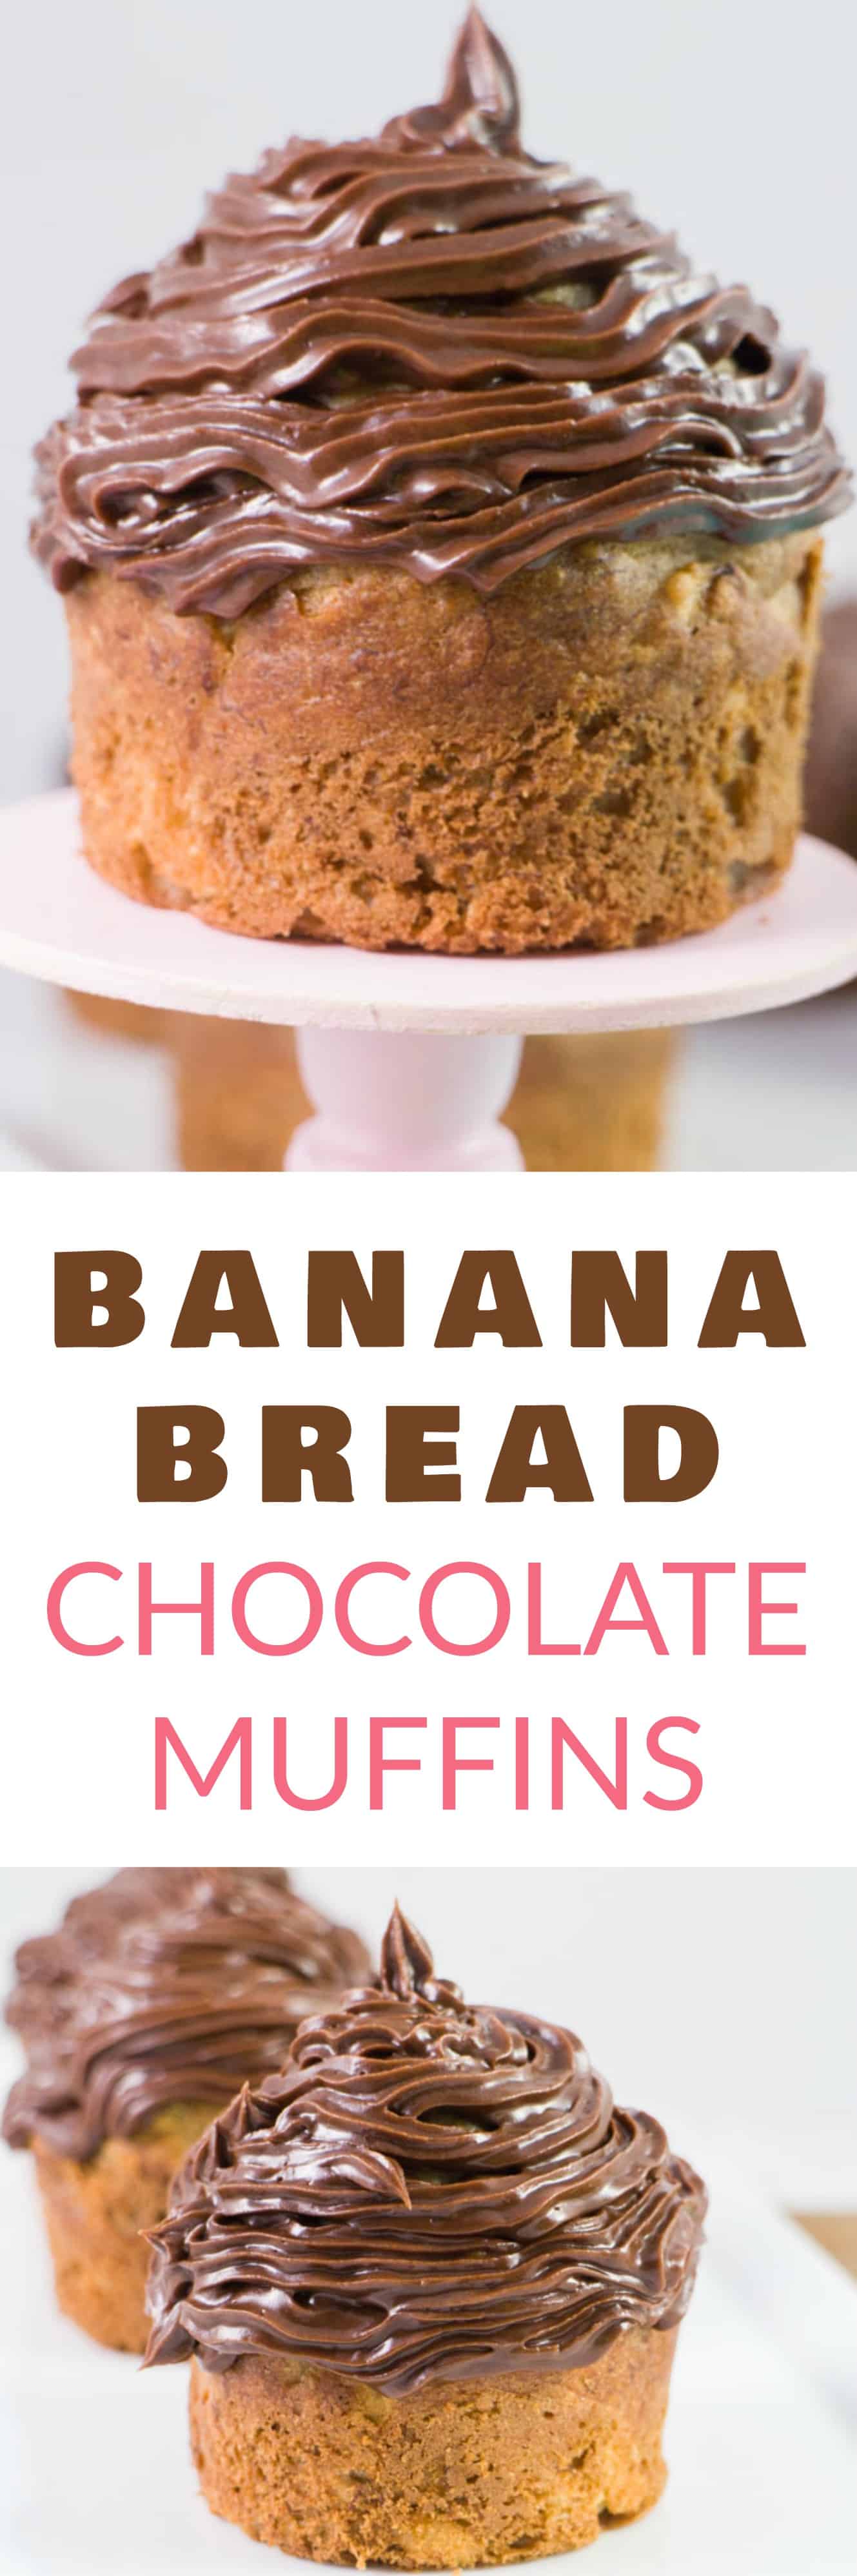 Banana Bread Muffins with CHOCOLATE Frosting!  This easy recipe is made with 3 bananas (that makes it healthy, right?) and tastes just like banana bread!  These muffins are moist and extra soft!  